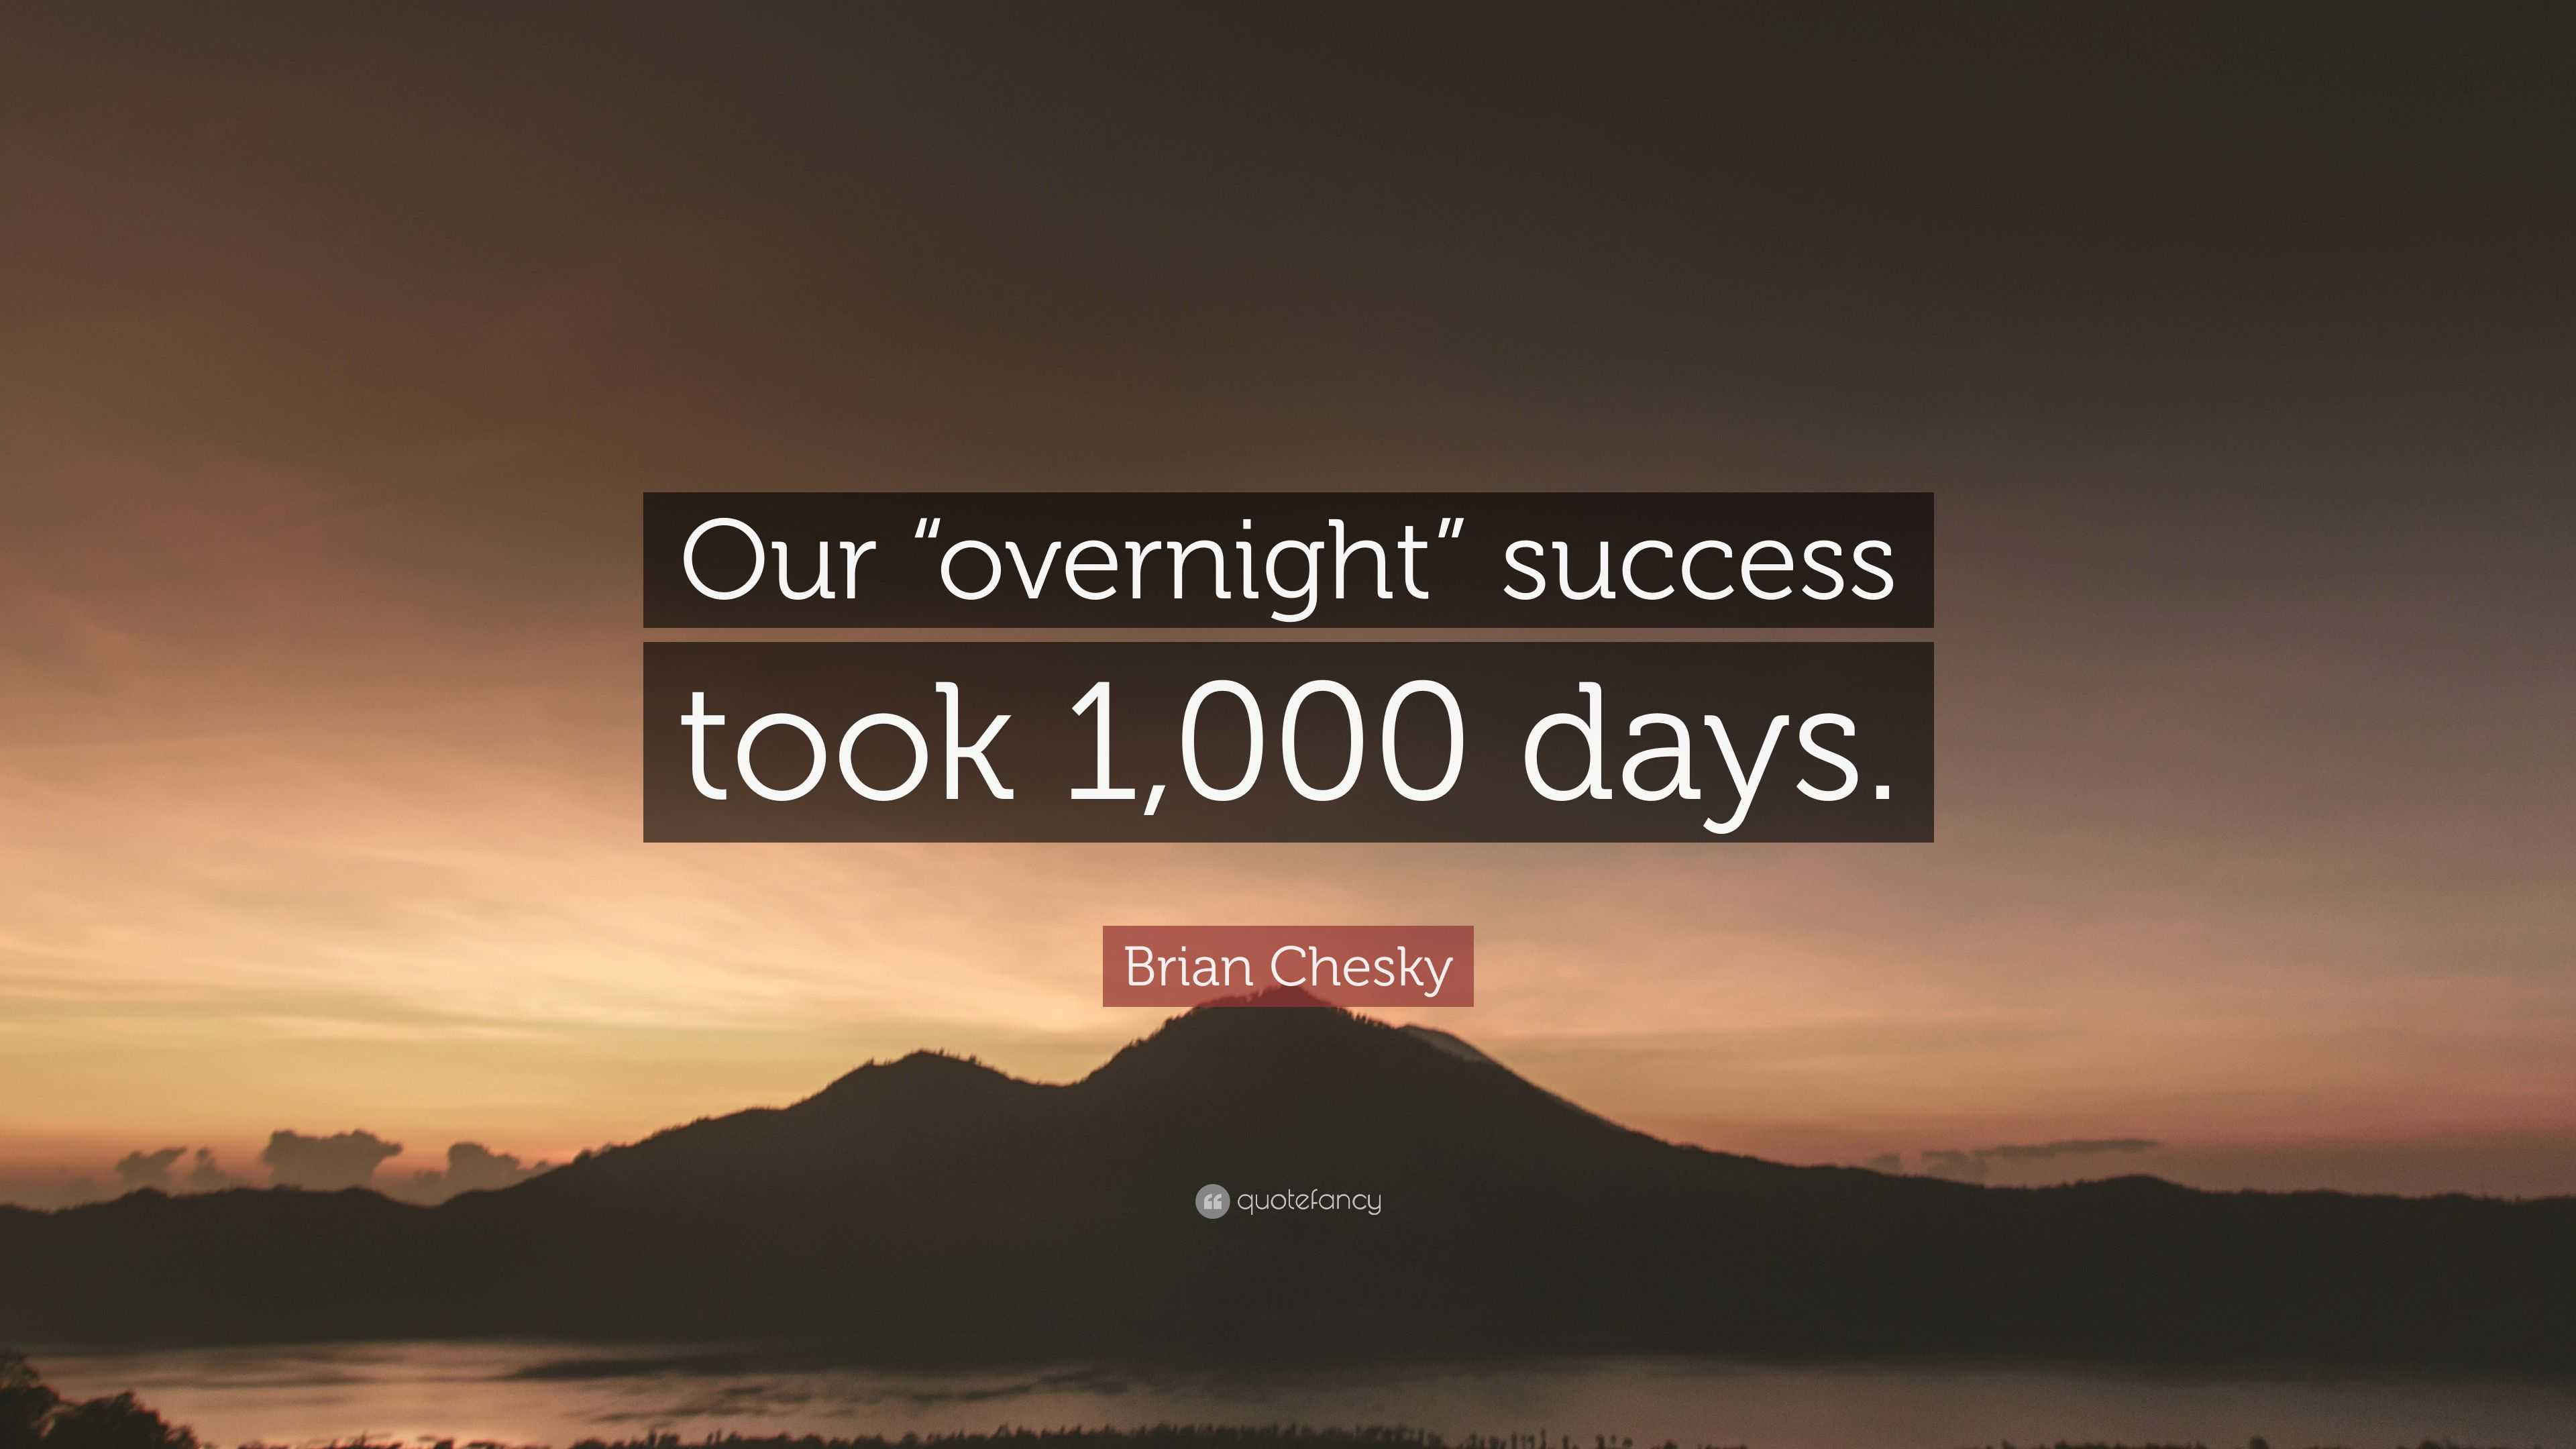 Brian Chesky Quote: "Our "overnight" success took 1,000 days." (9 wallpapers) - Quotefancy